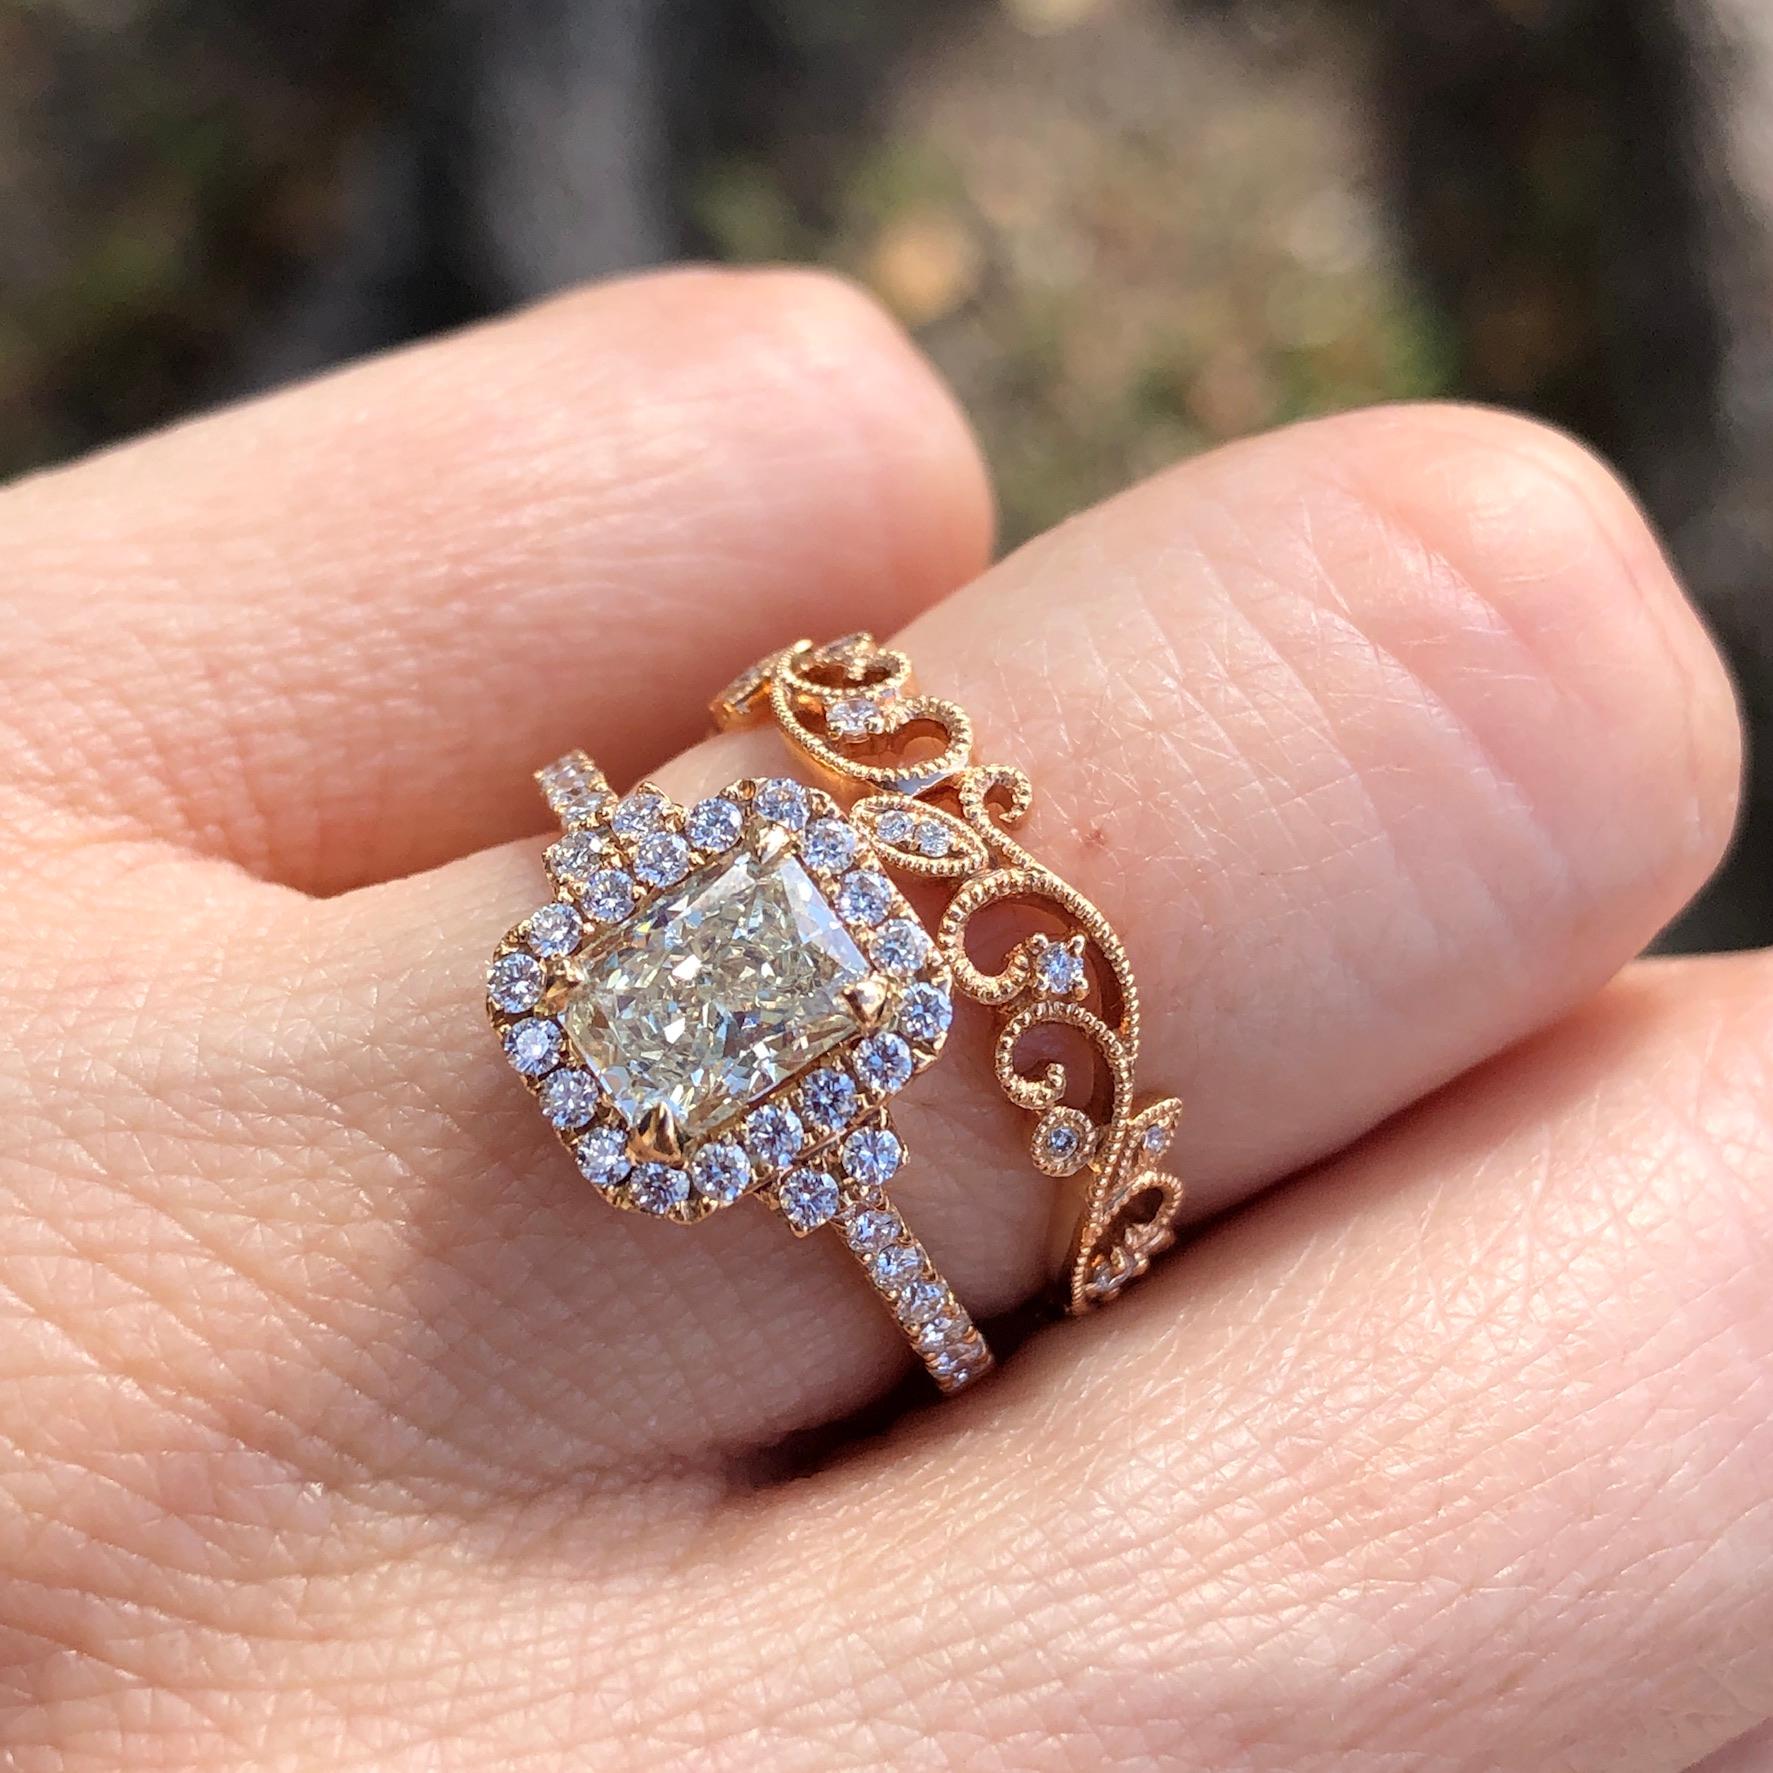 Contemporary Rose Gold Engagement Ring 1 Carat Radiant Cut Diamond For Sale